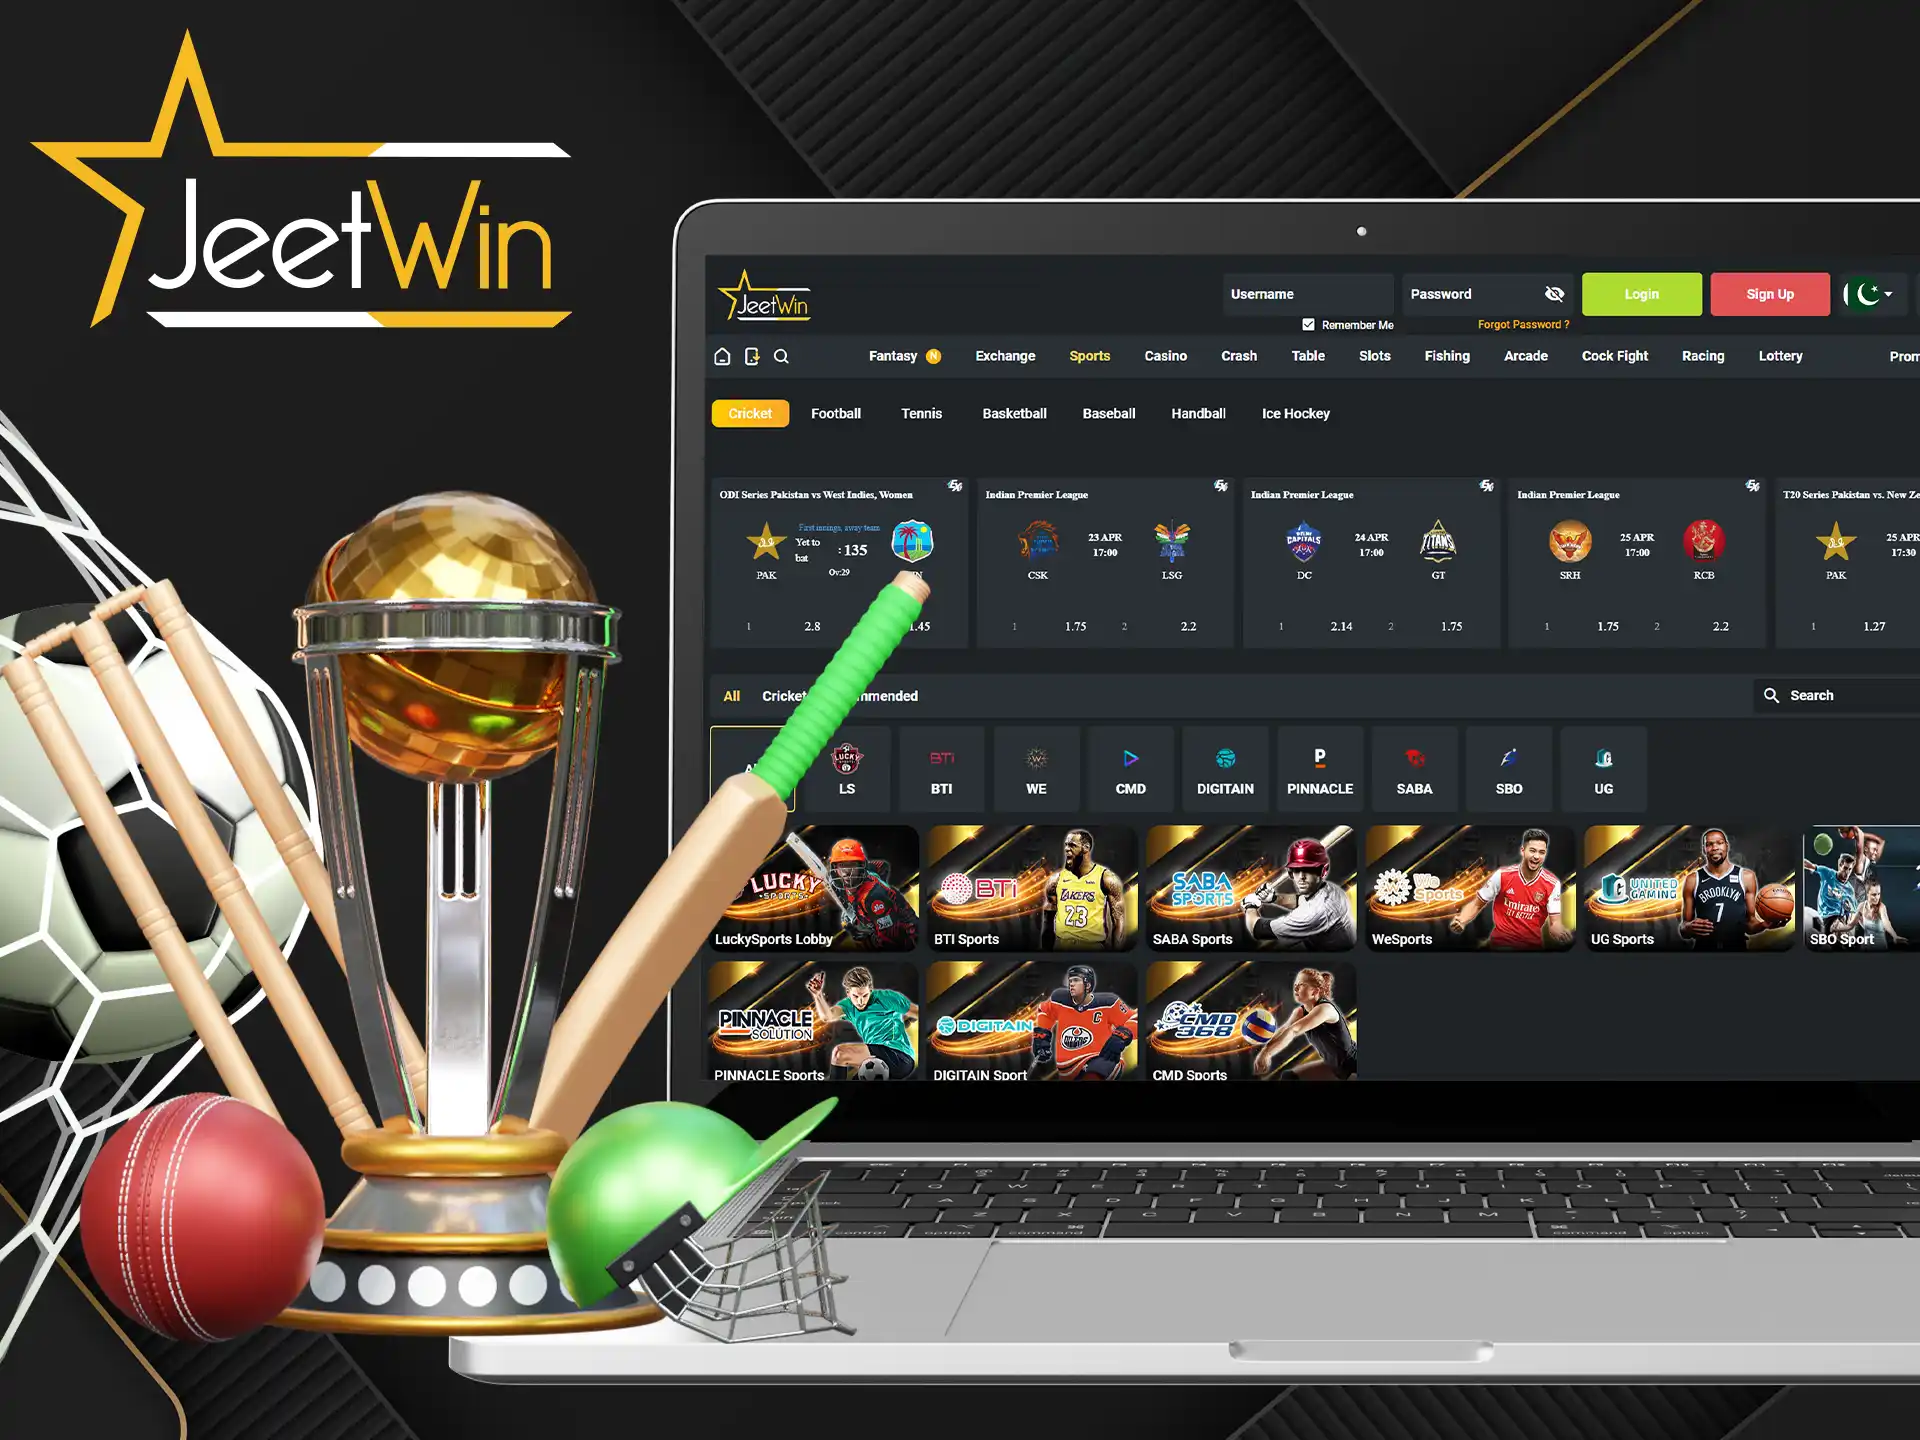 JeetWin offers betting on the most popular sports to Pakistani users.